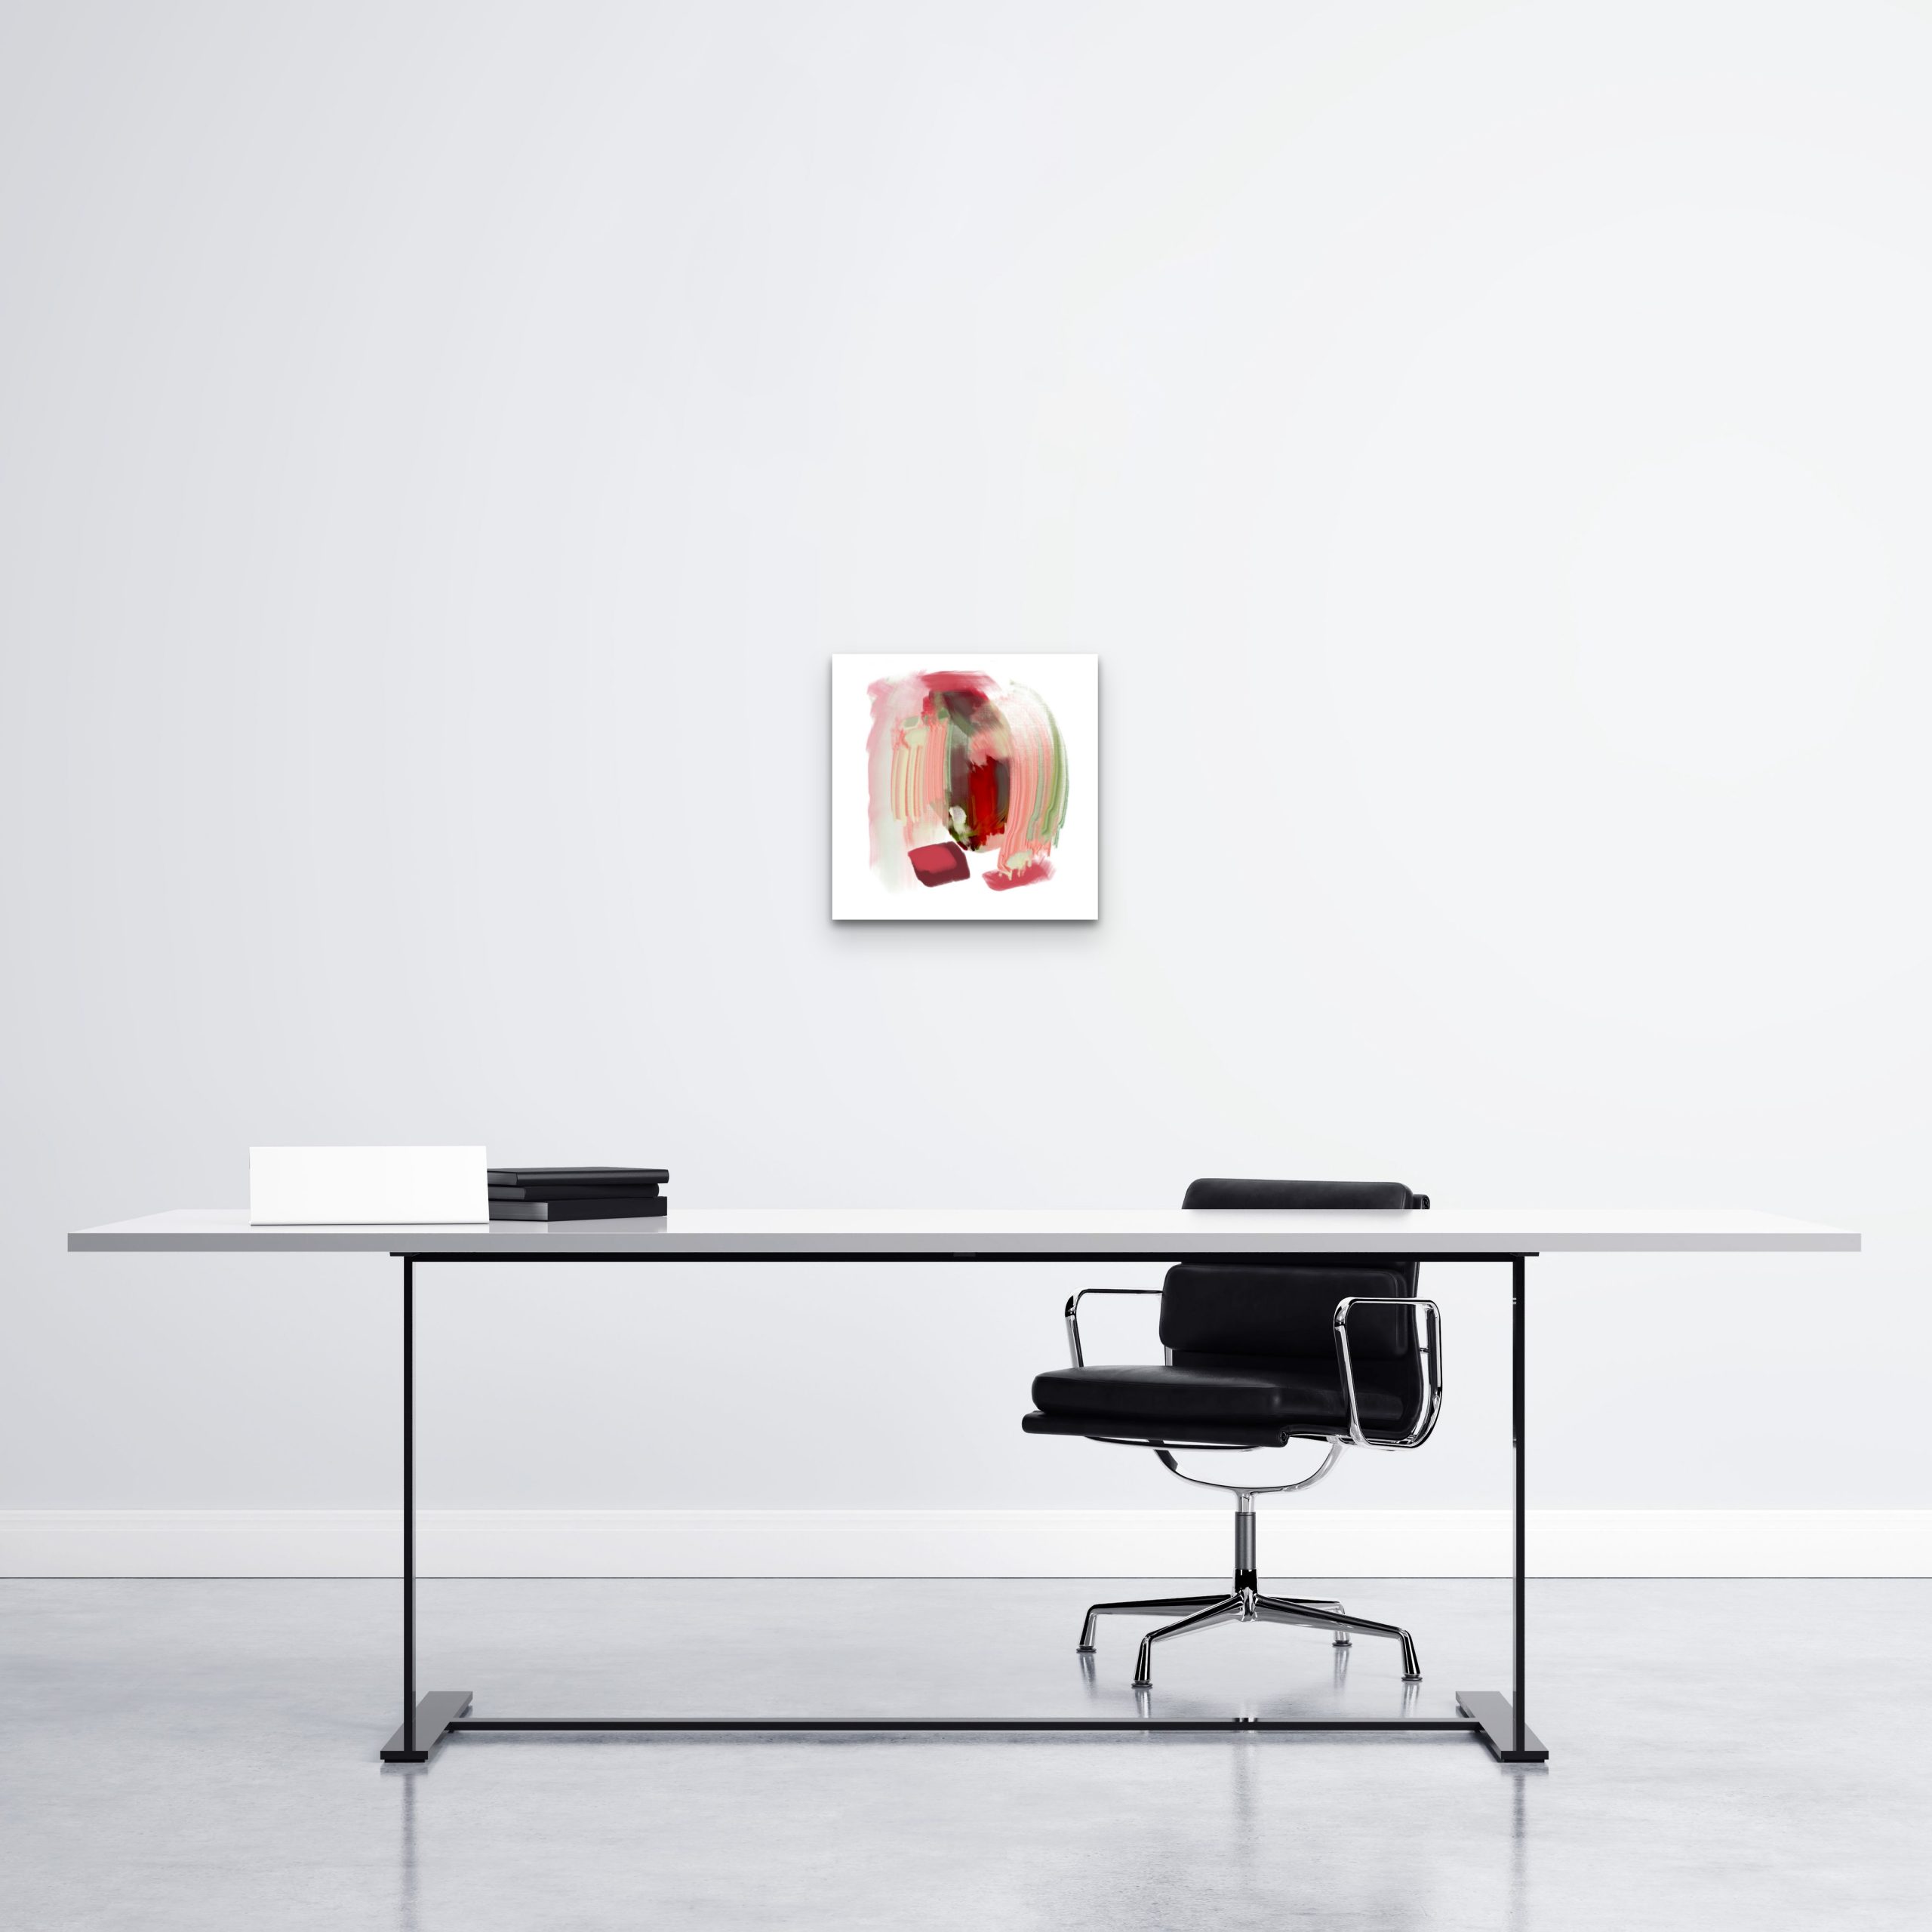 An artwork measuring 12 x 12 inches displayed in an office setting. The colourful piece adds a touch of creativity and vibrancy to the workspace, enhancing the overall aesthetic appeal.